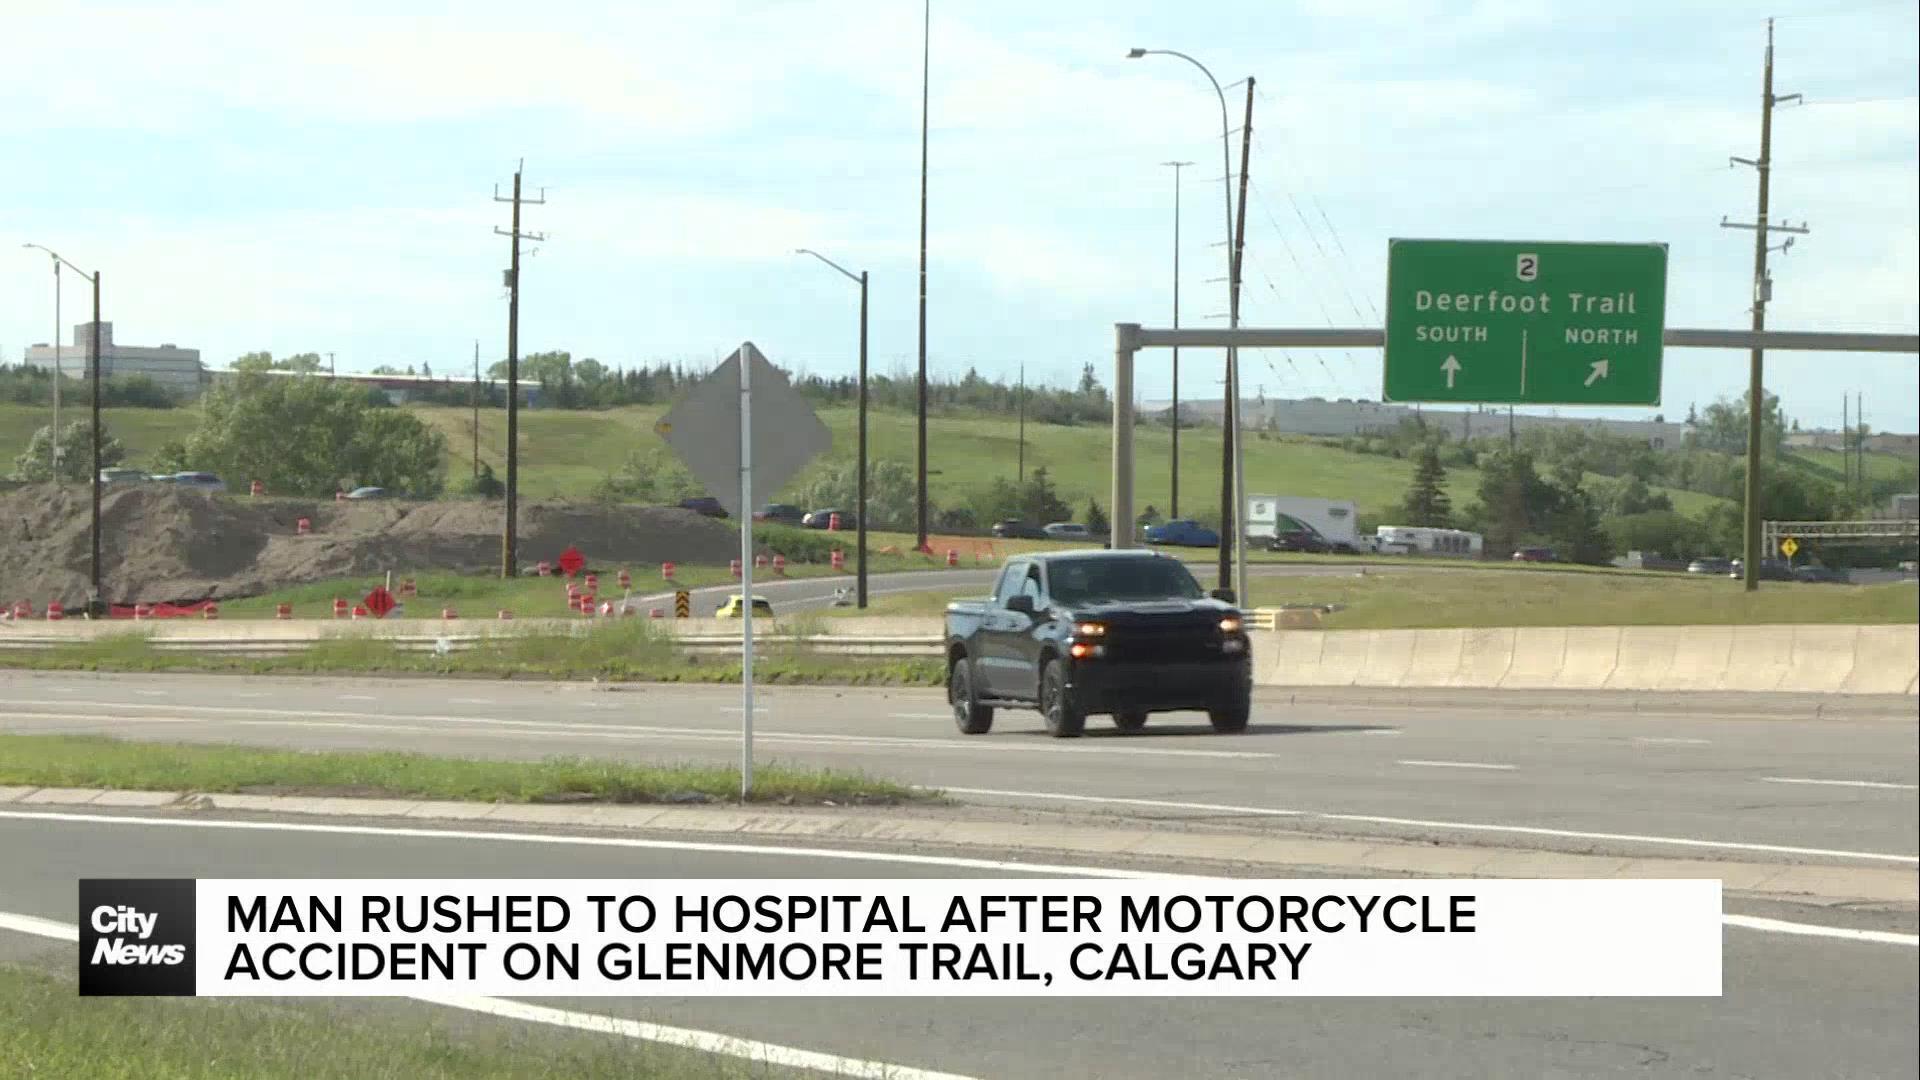 Man rushed to hospital after motorcycle accident on Glenmore Trail, Calgary